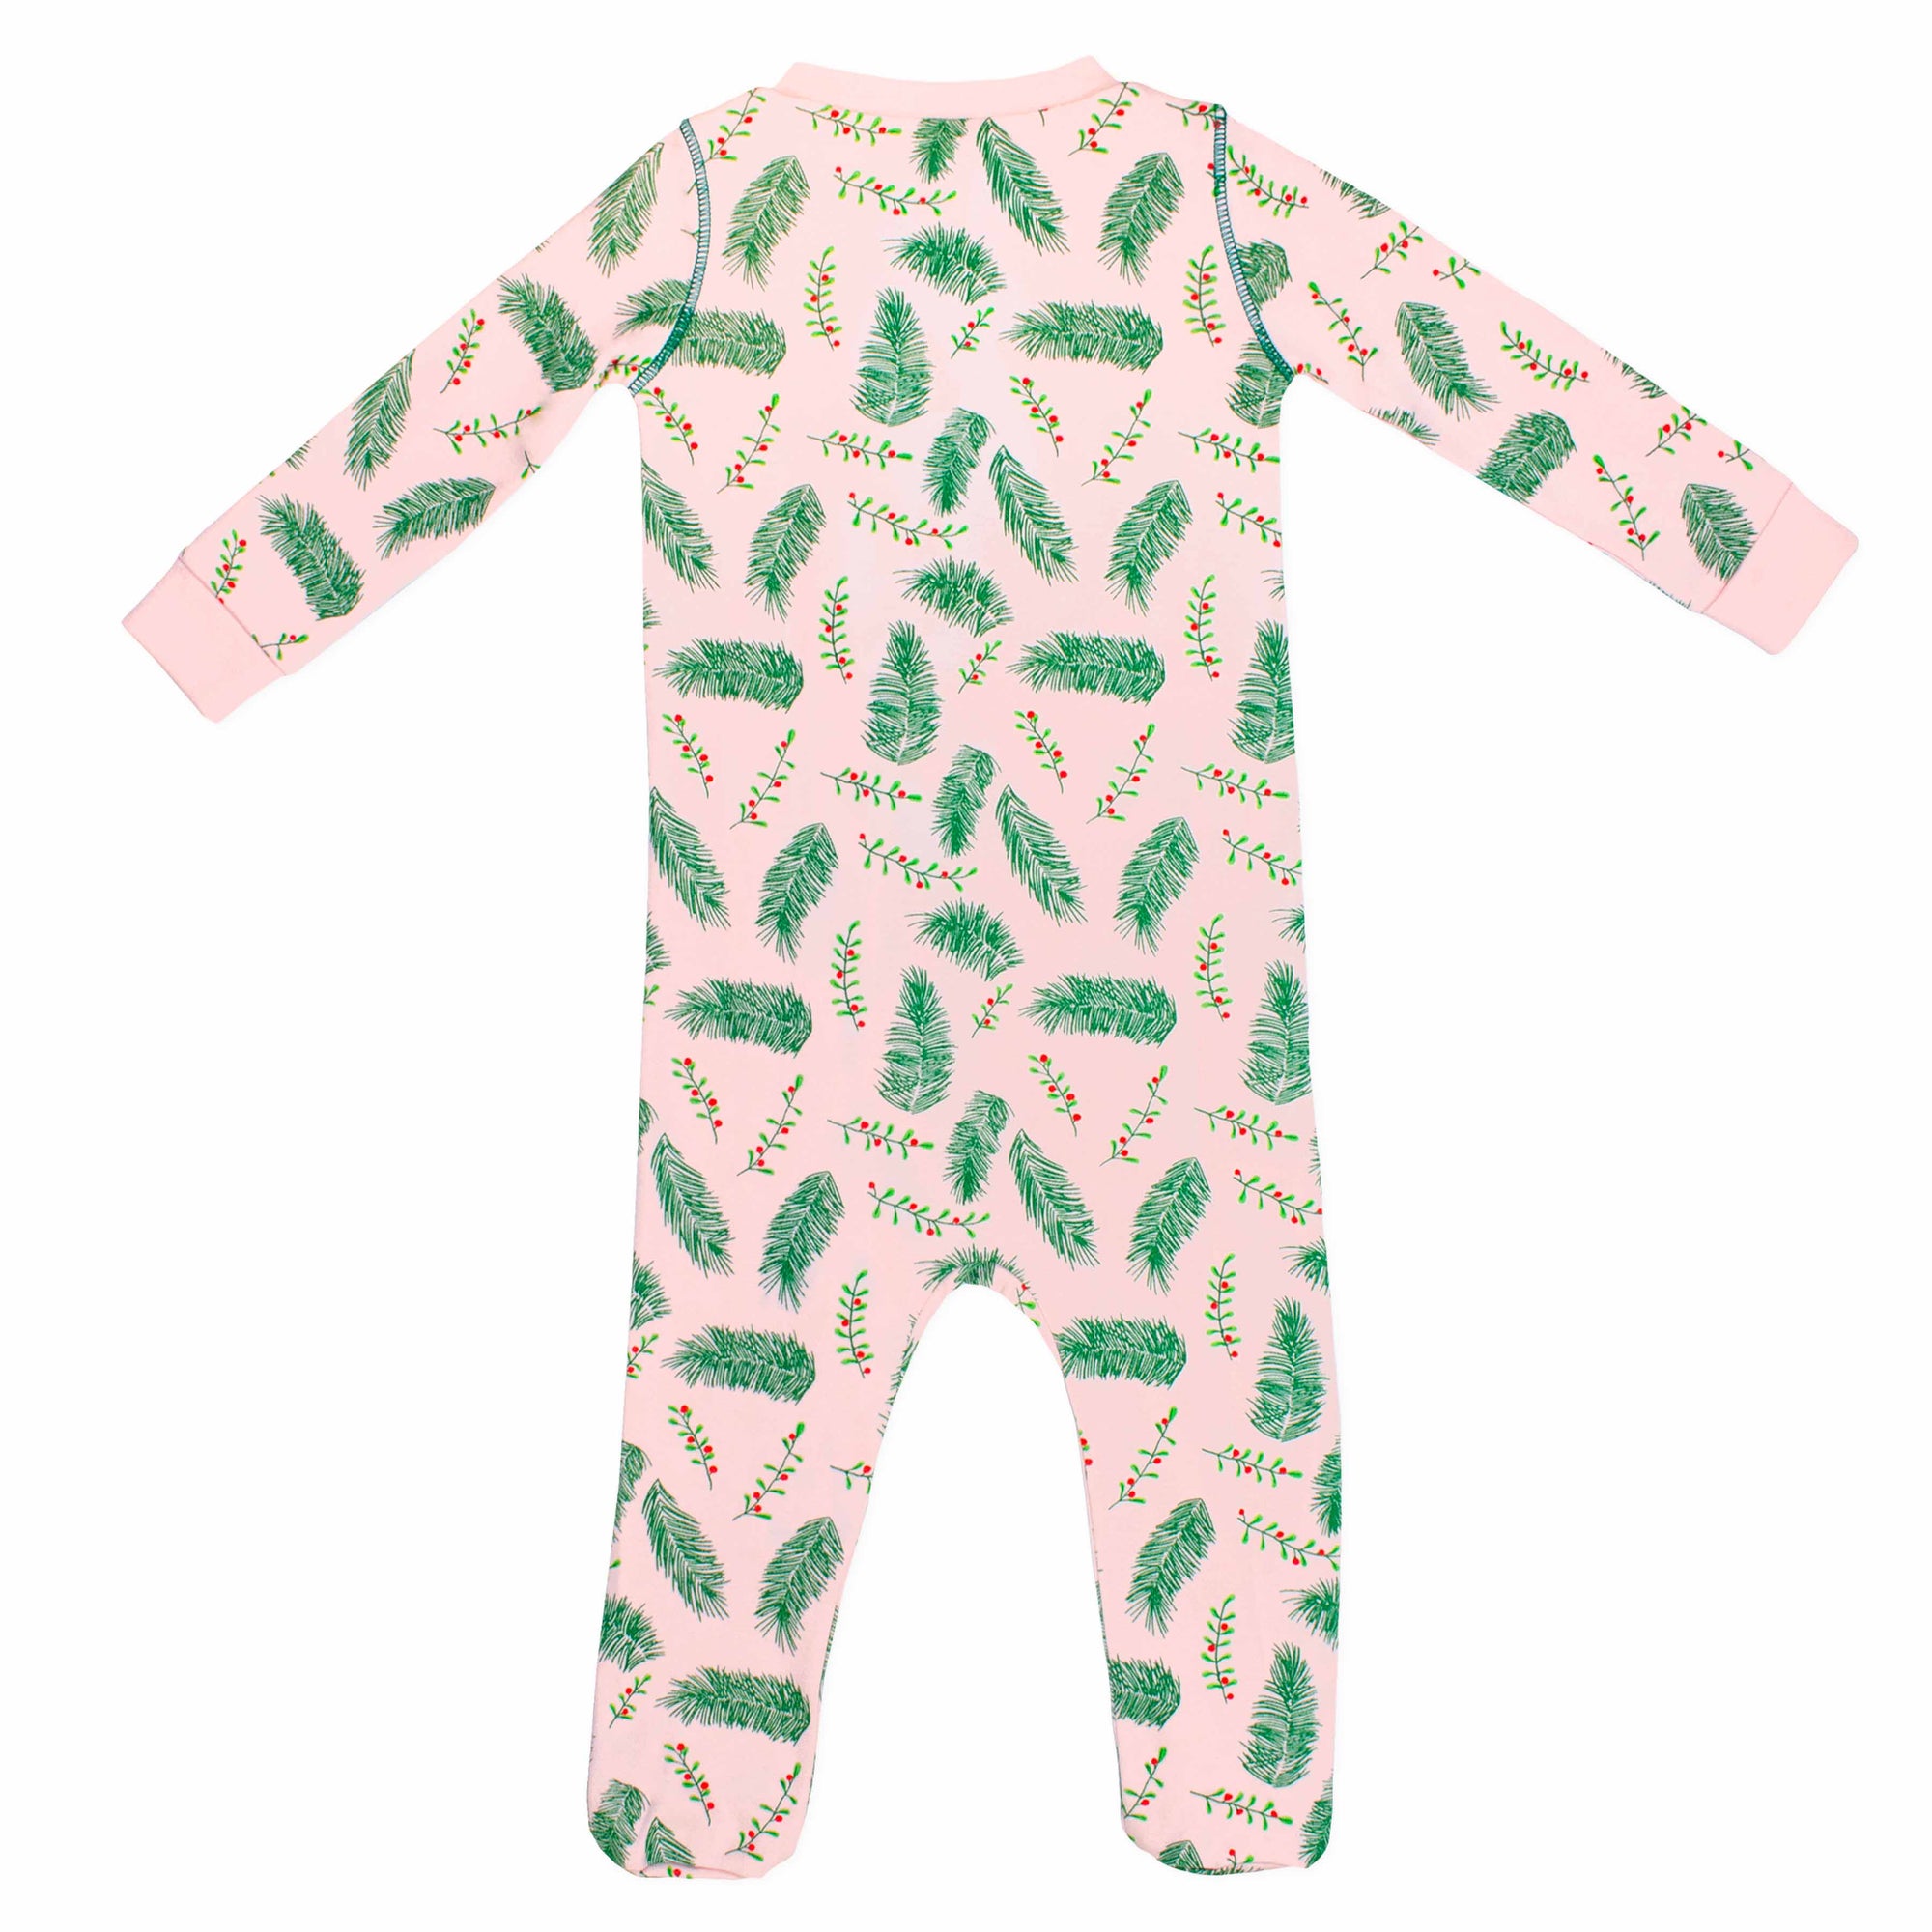 Light pink footed pajama with vintage-inspired Christmas holly pattern made in pima cotton - back view